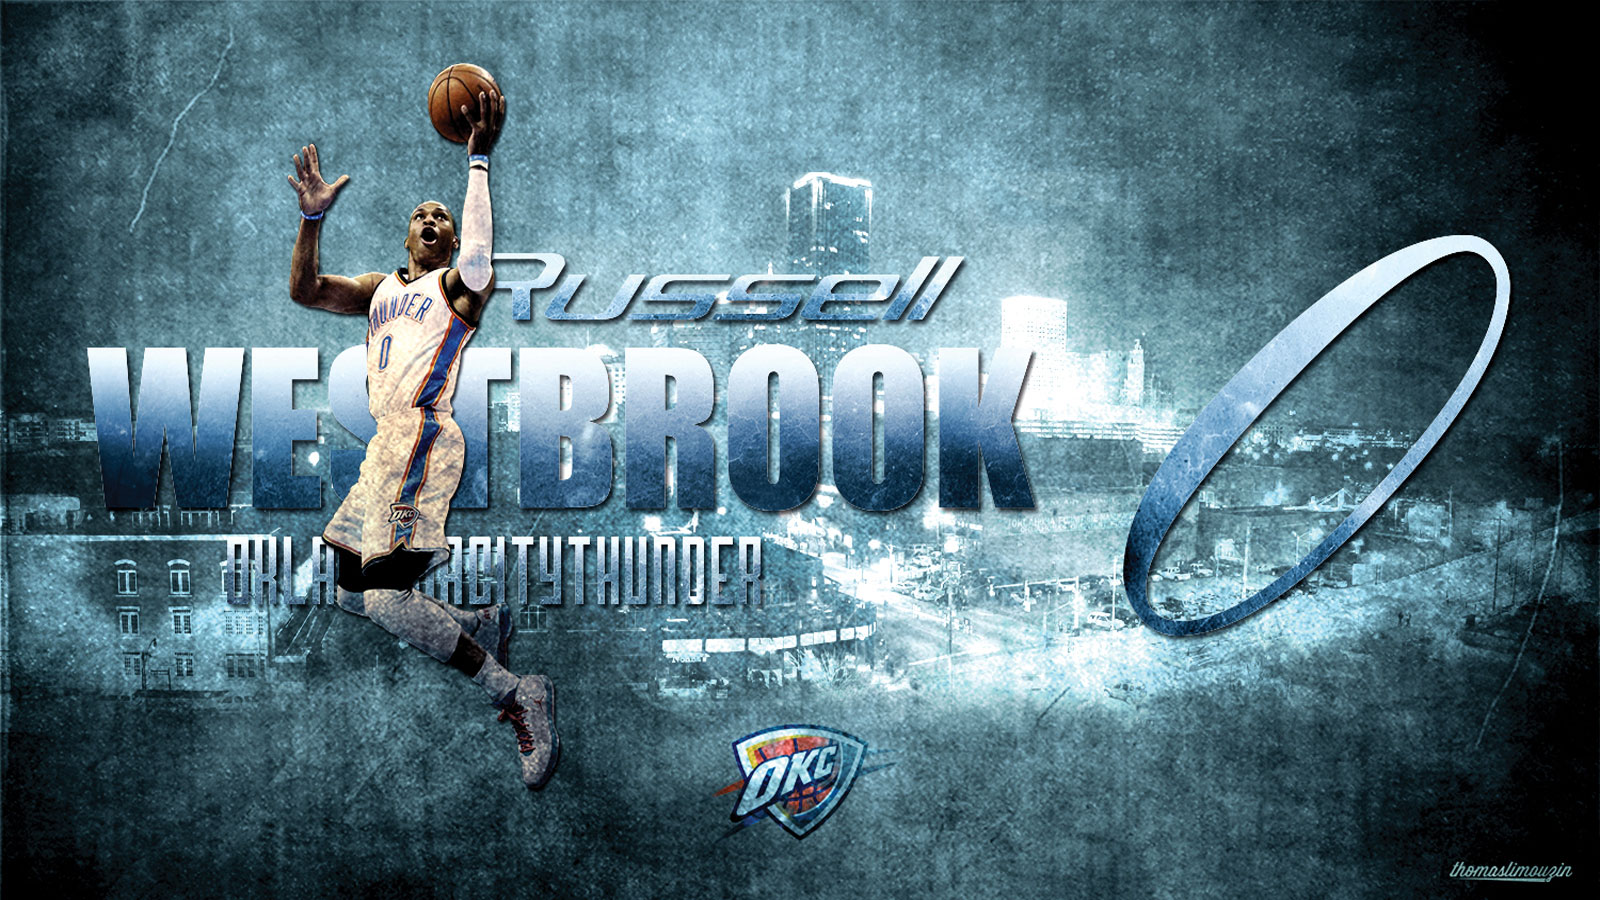 Russell Westbrook Wallpaper Height Weight Position College High